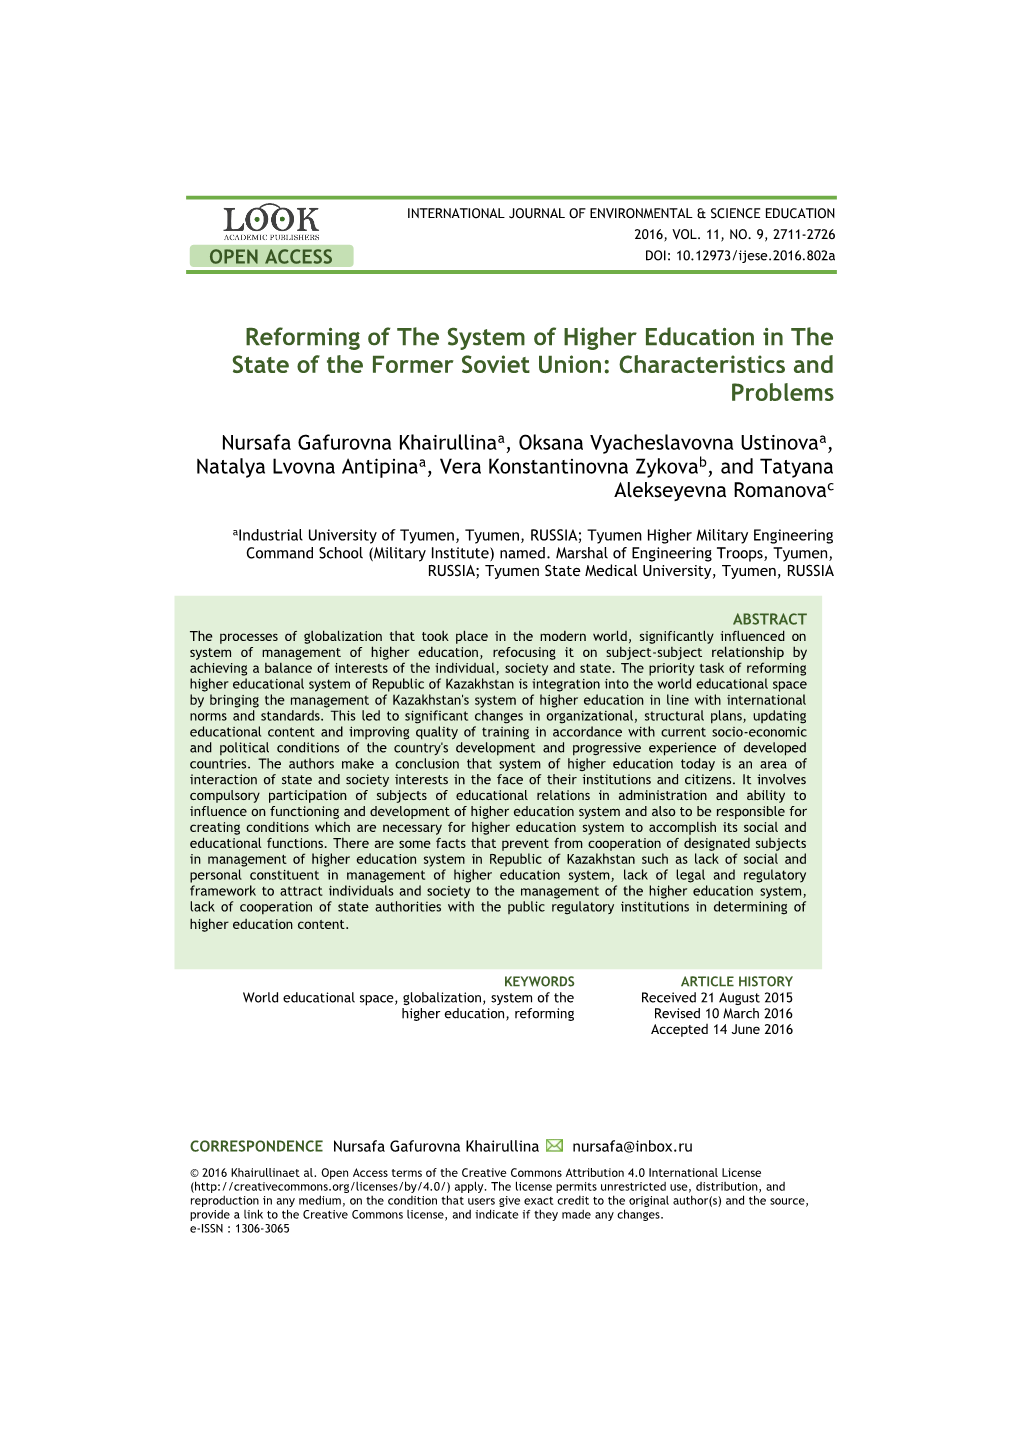 Reforming of the System of Higher Education in the State of the Former Soviet Union: Characteristics and Problems